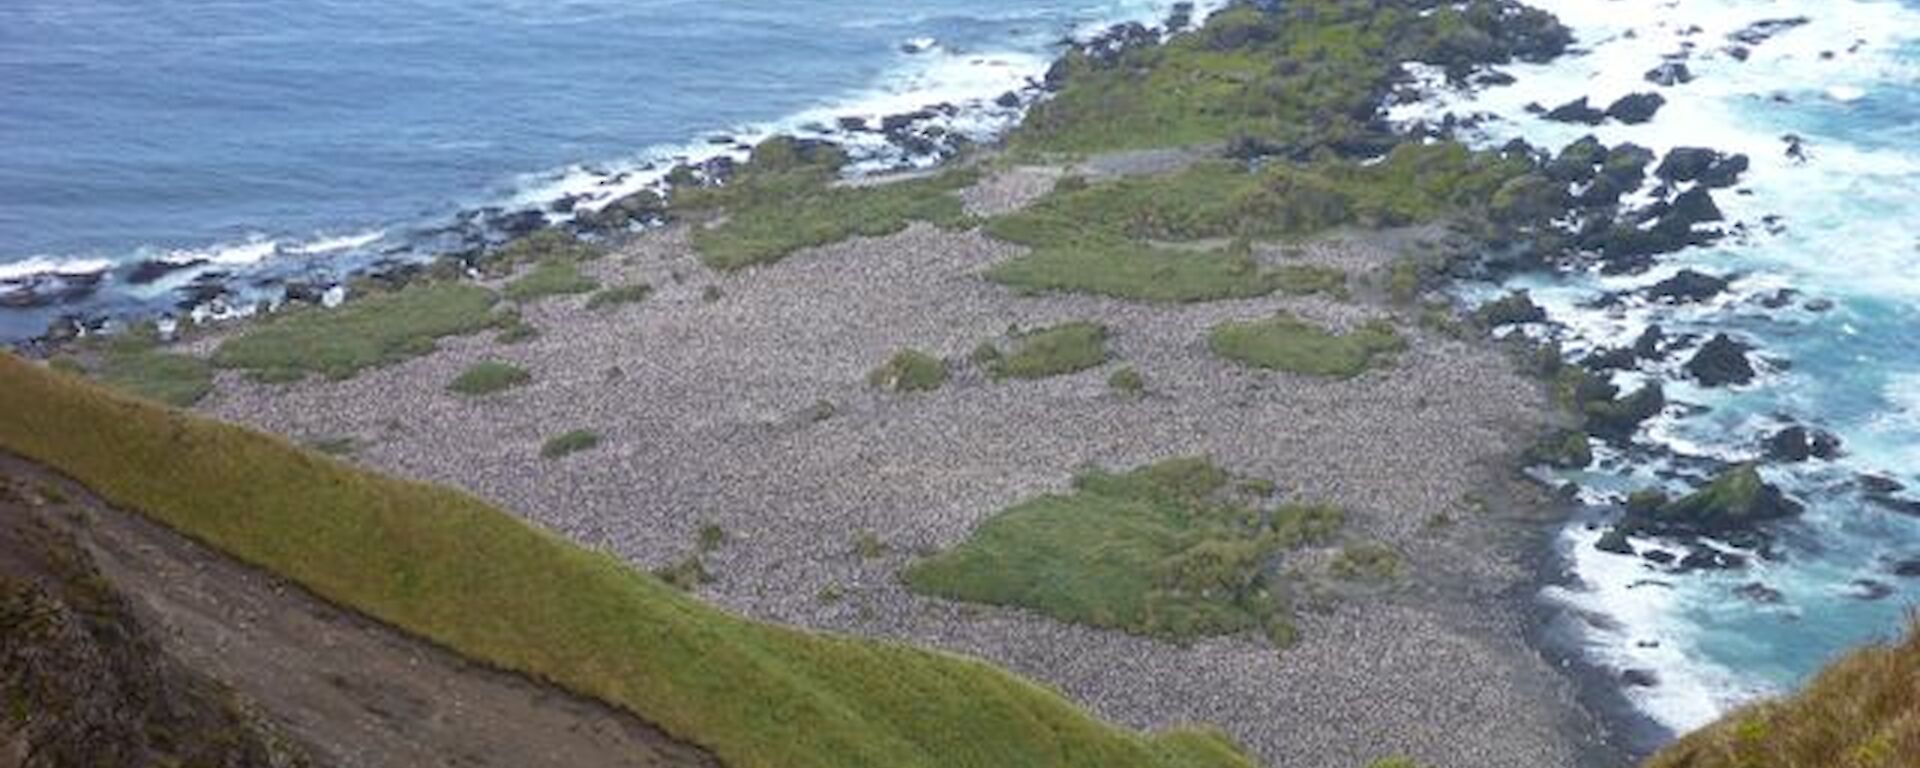 Part of the Hurd Point royal penguin colony